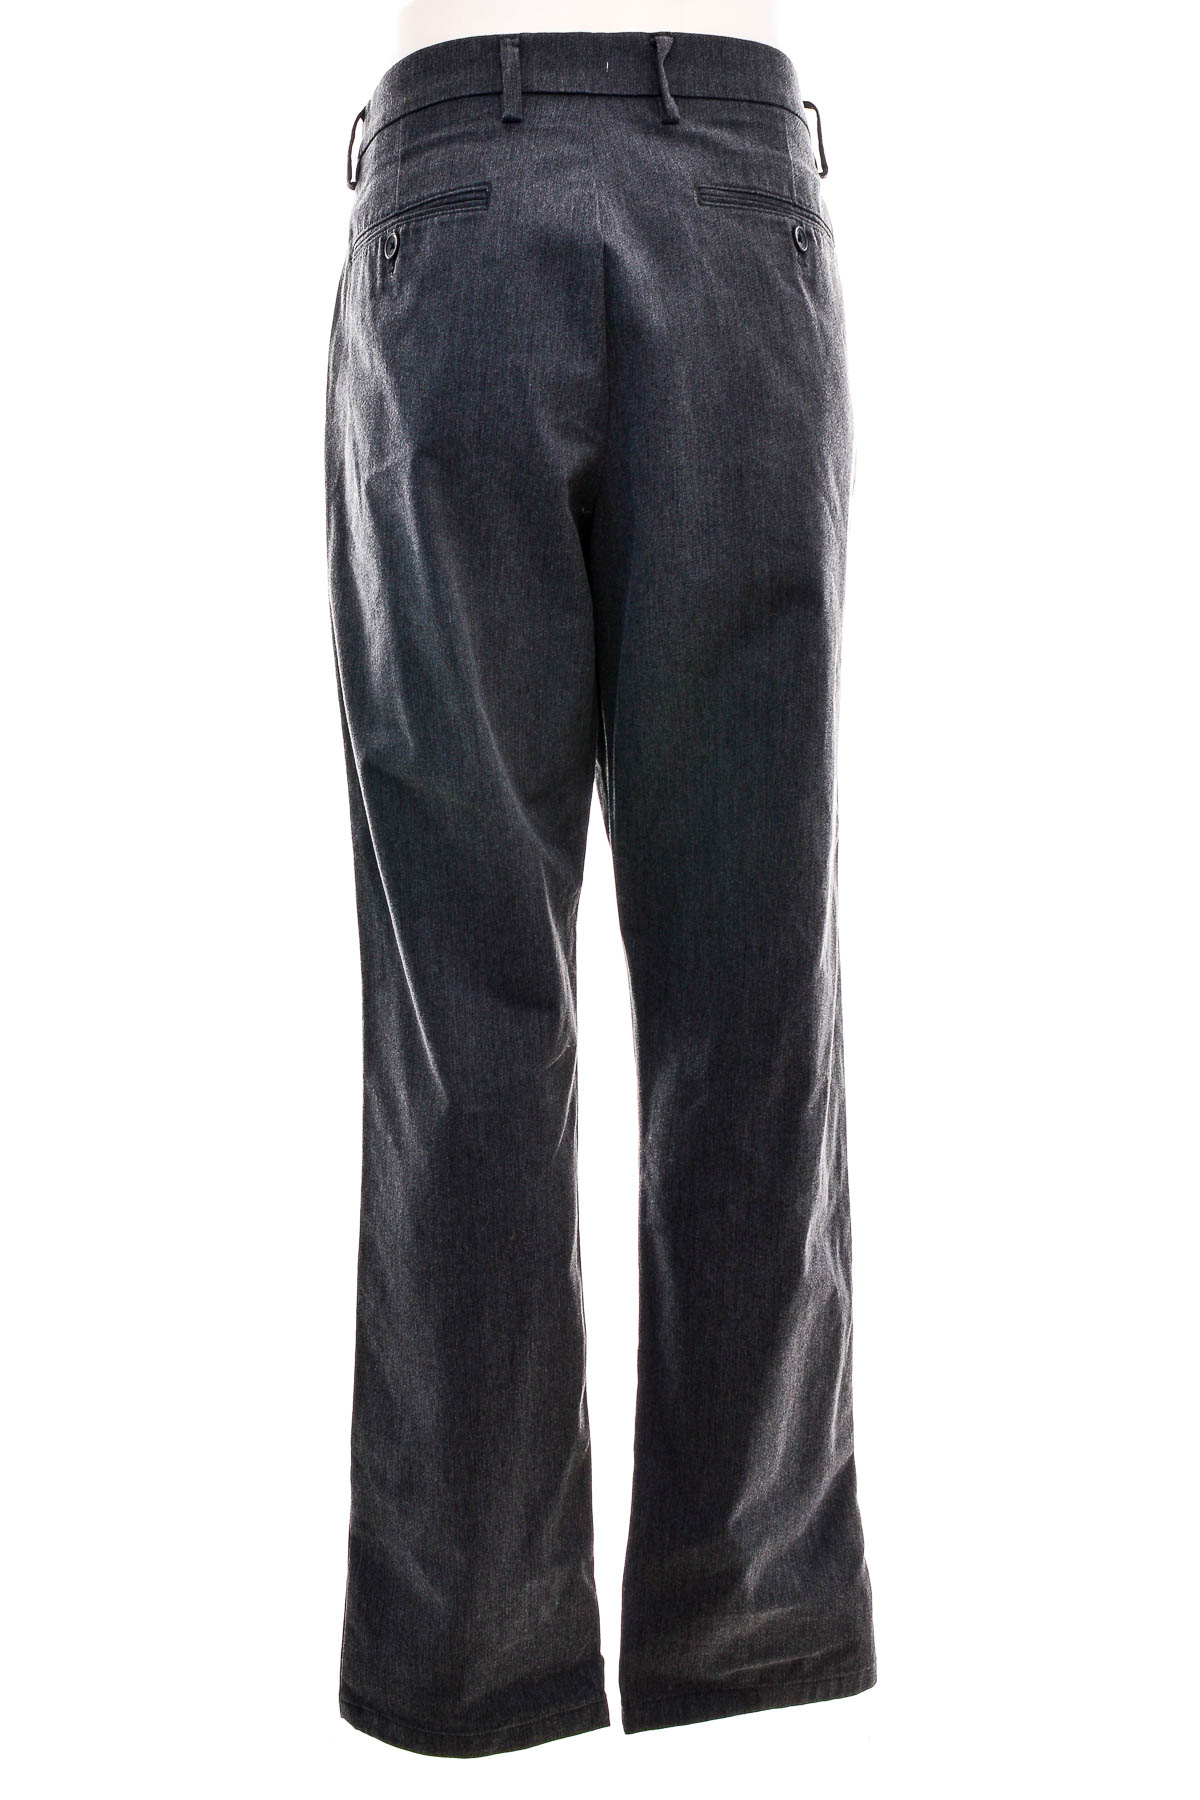 Men's trousers - OLD NAVY - 1